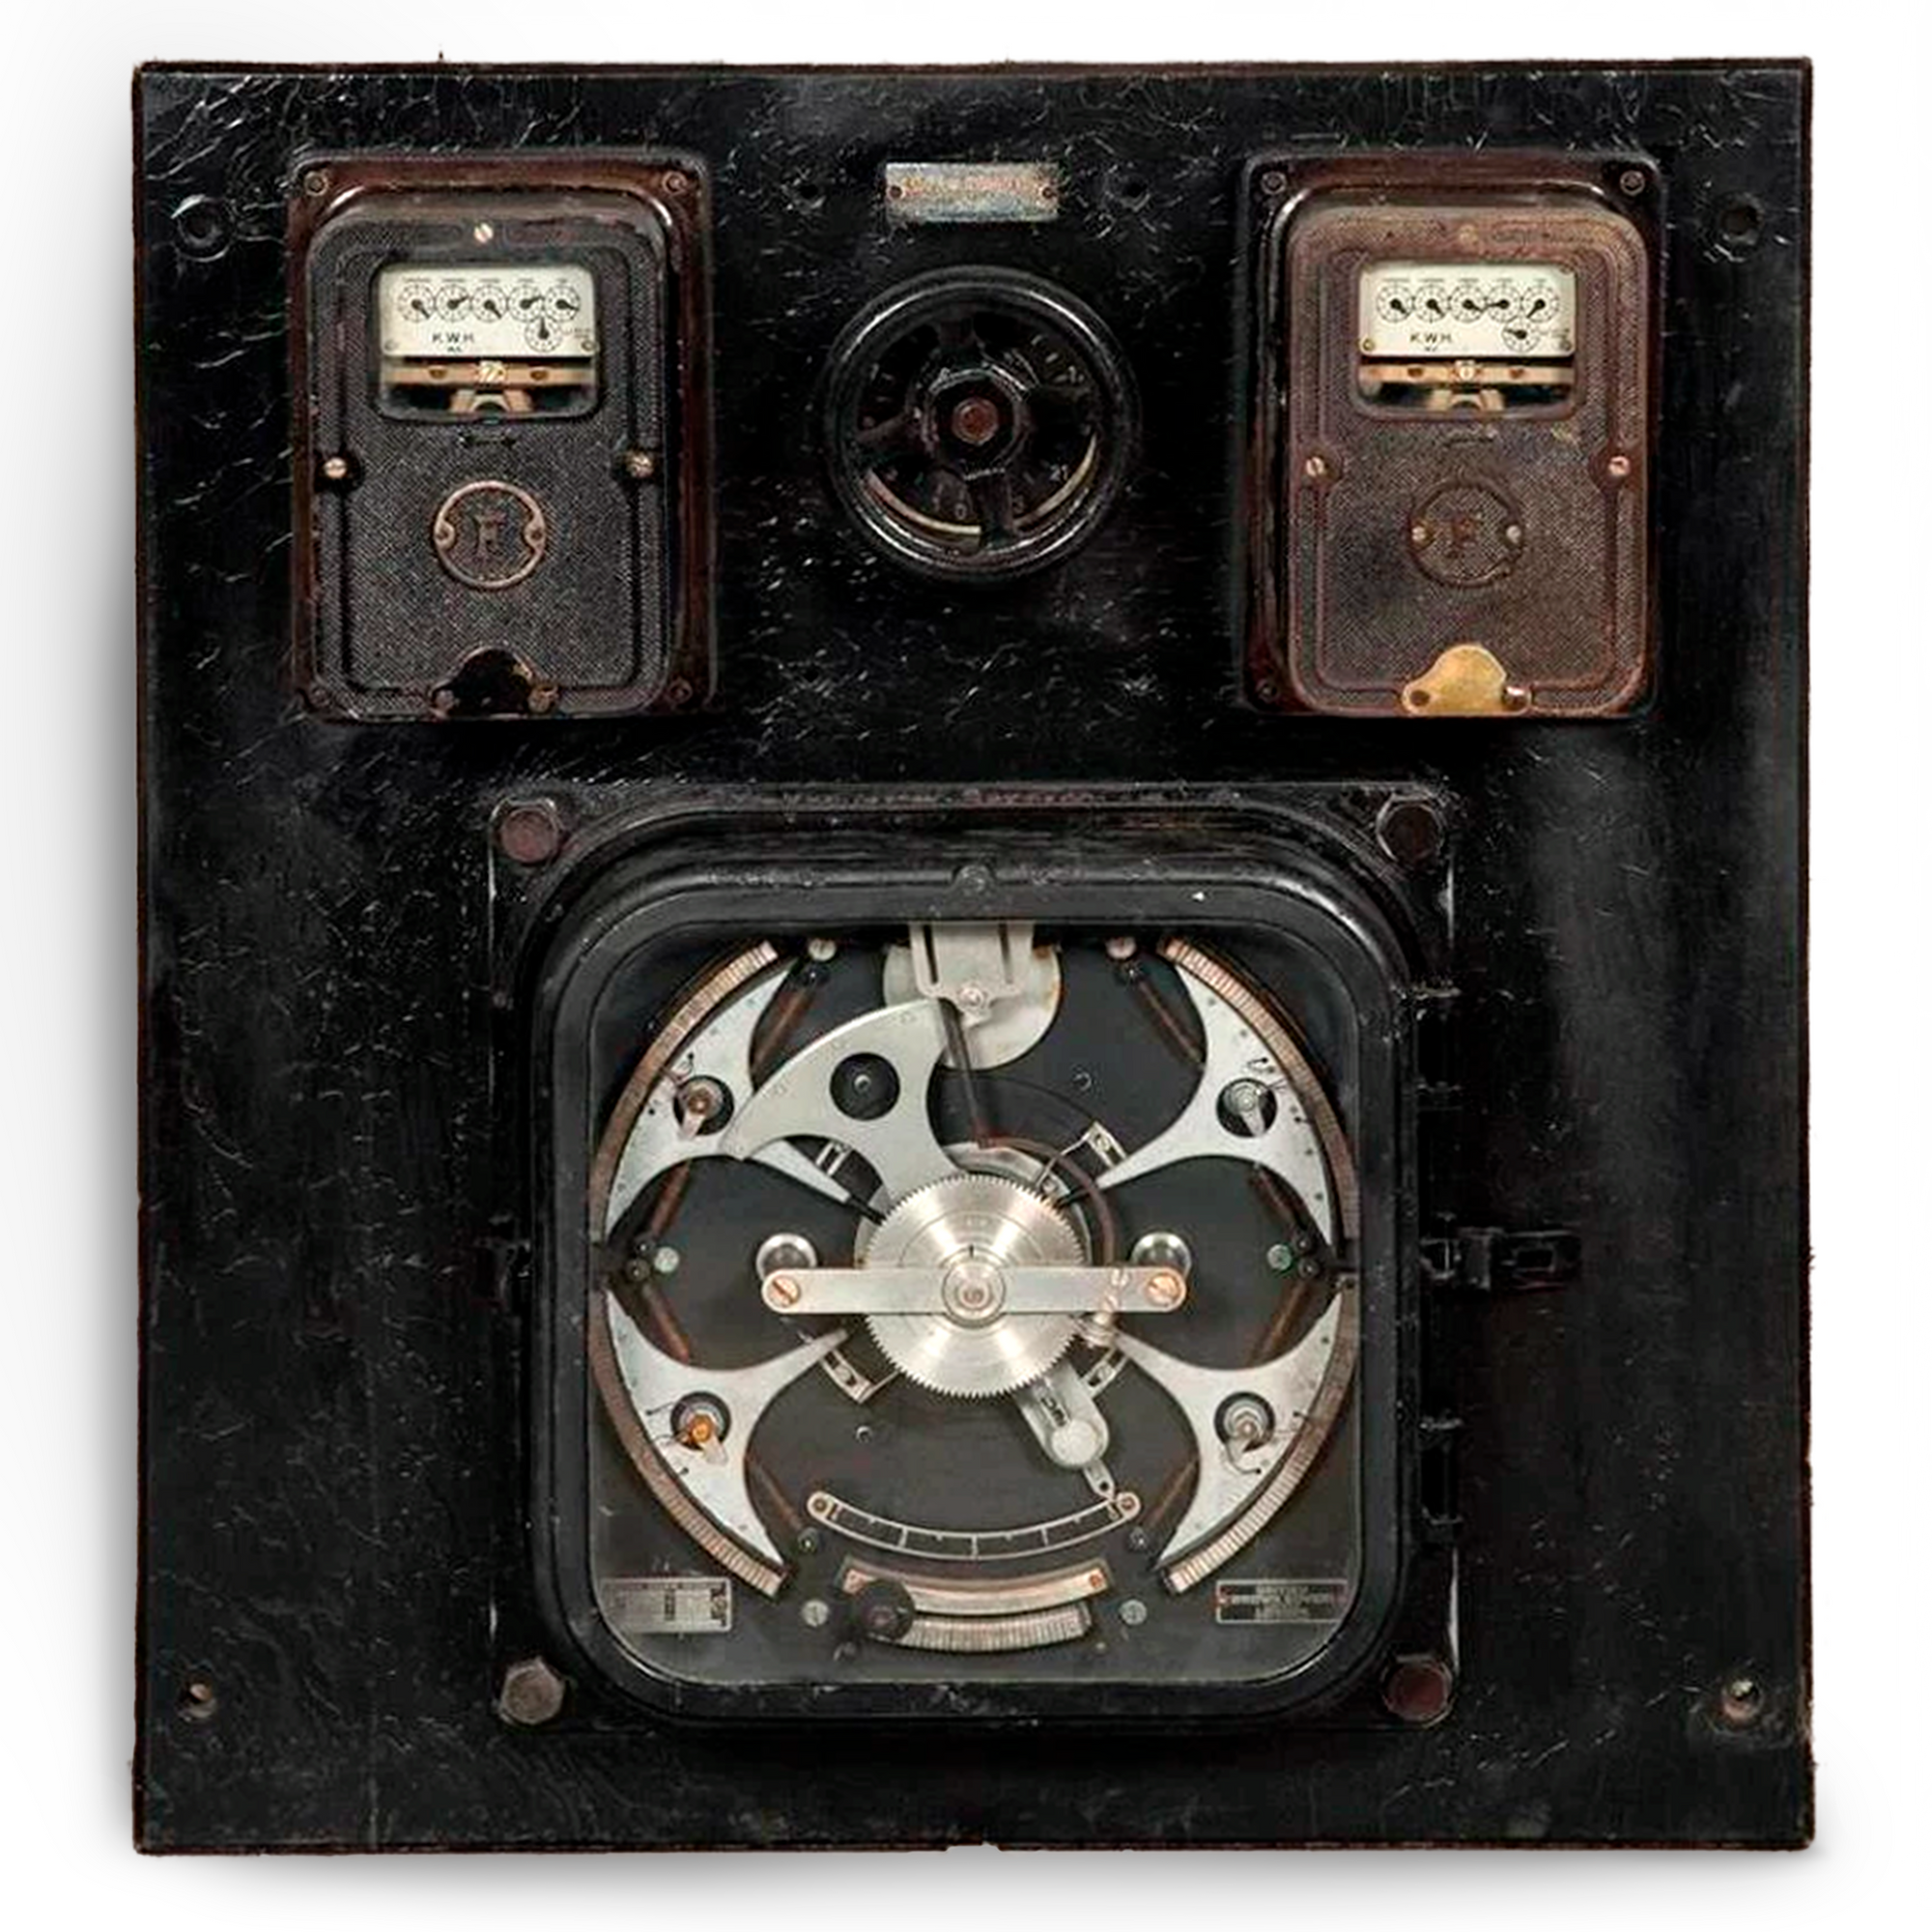 Vintage Ferranti Electric Meter from Pinewood Studios Power Station | The Architectural Forum